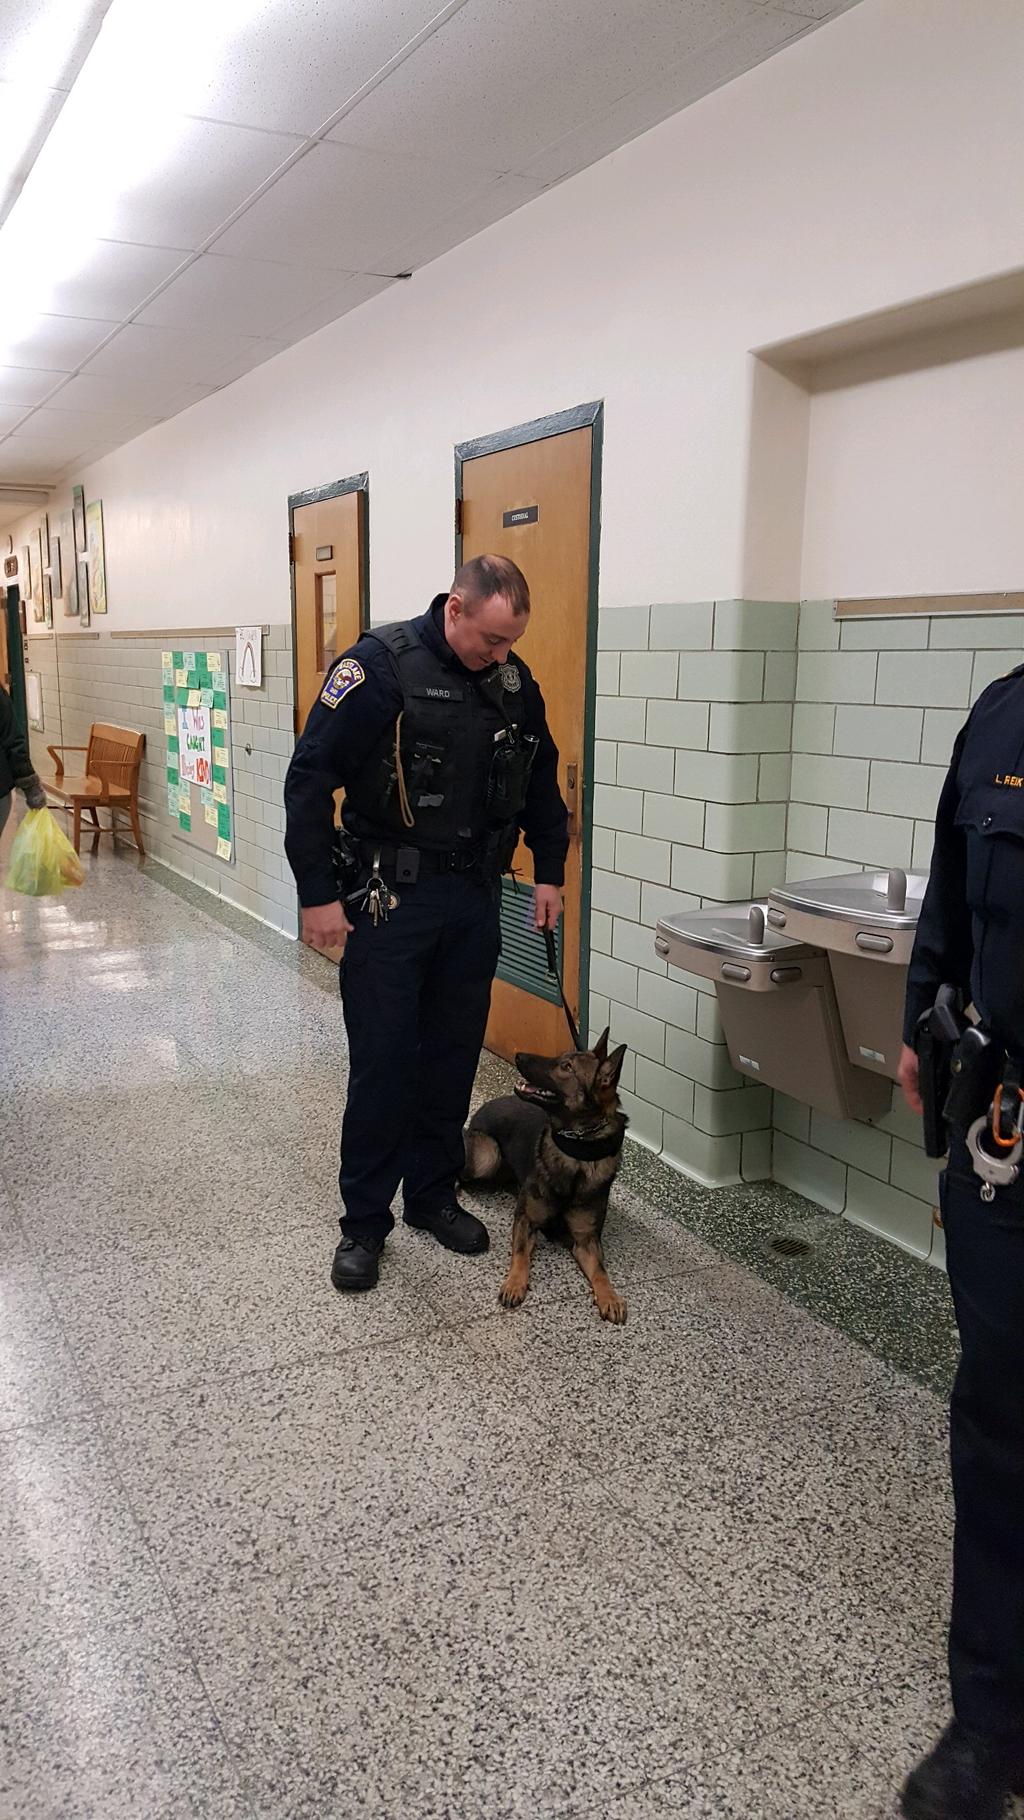 the rest of the school for the opportunity to help name our new Eastlake Police dog!